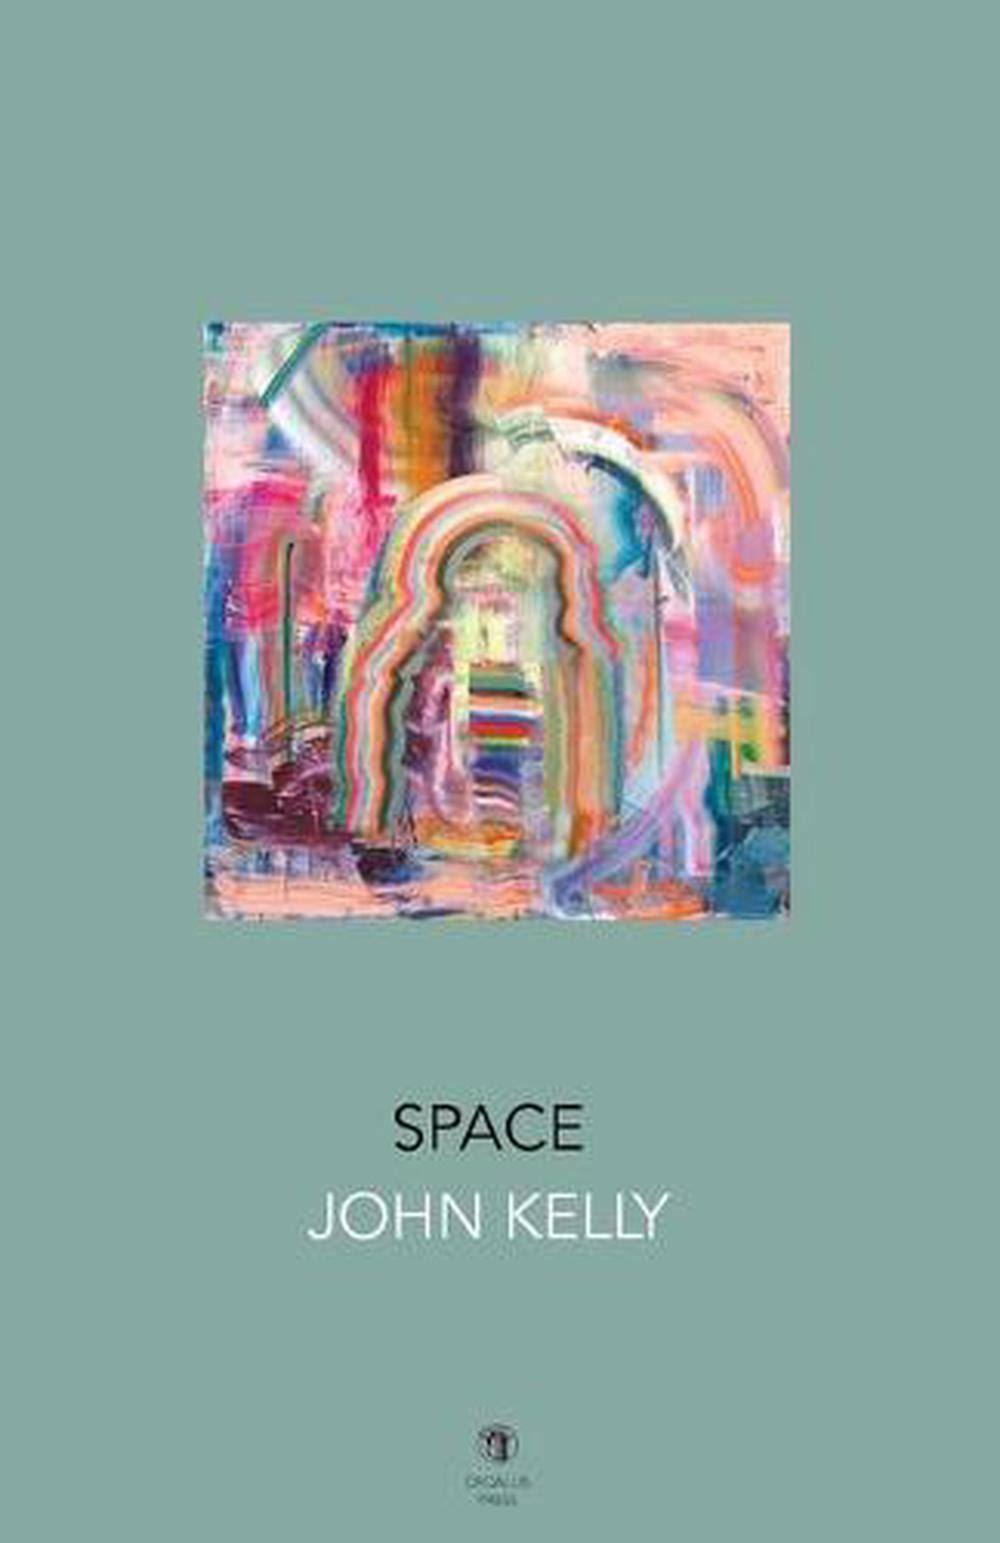 Space [Book]